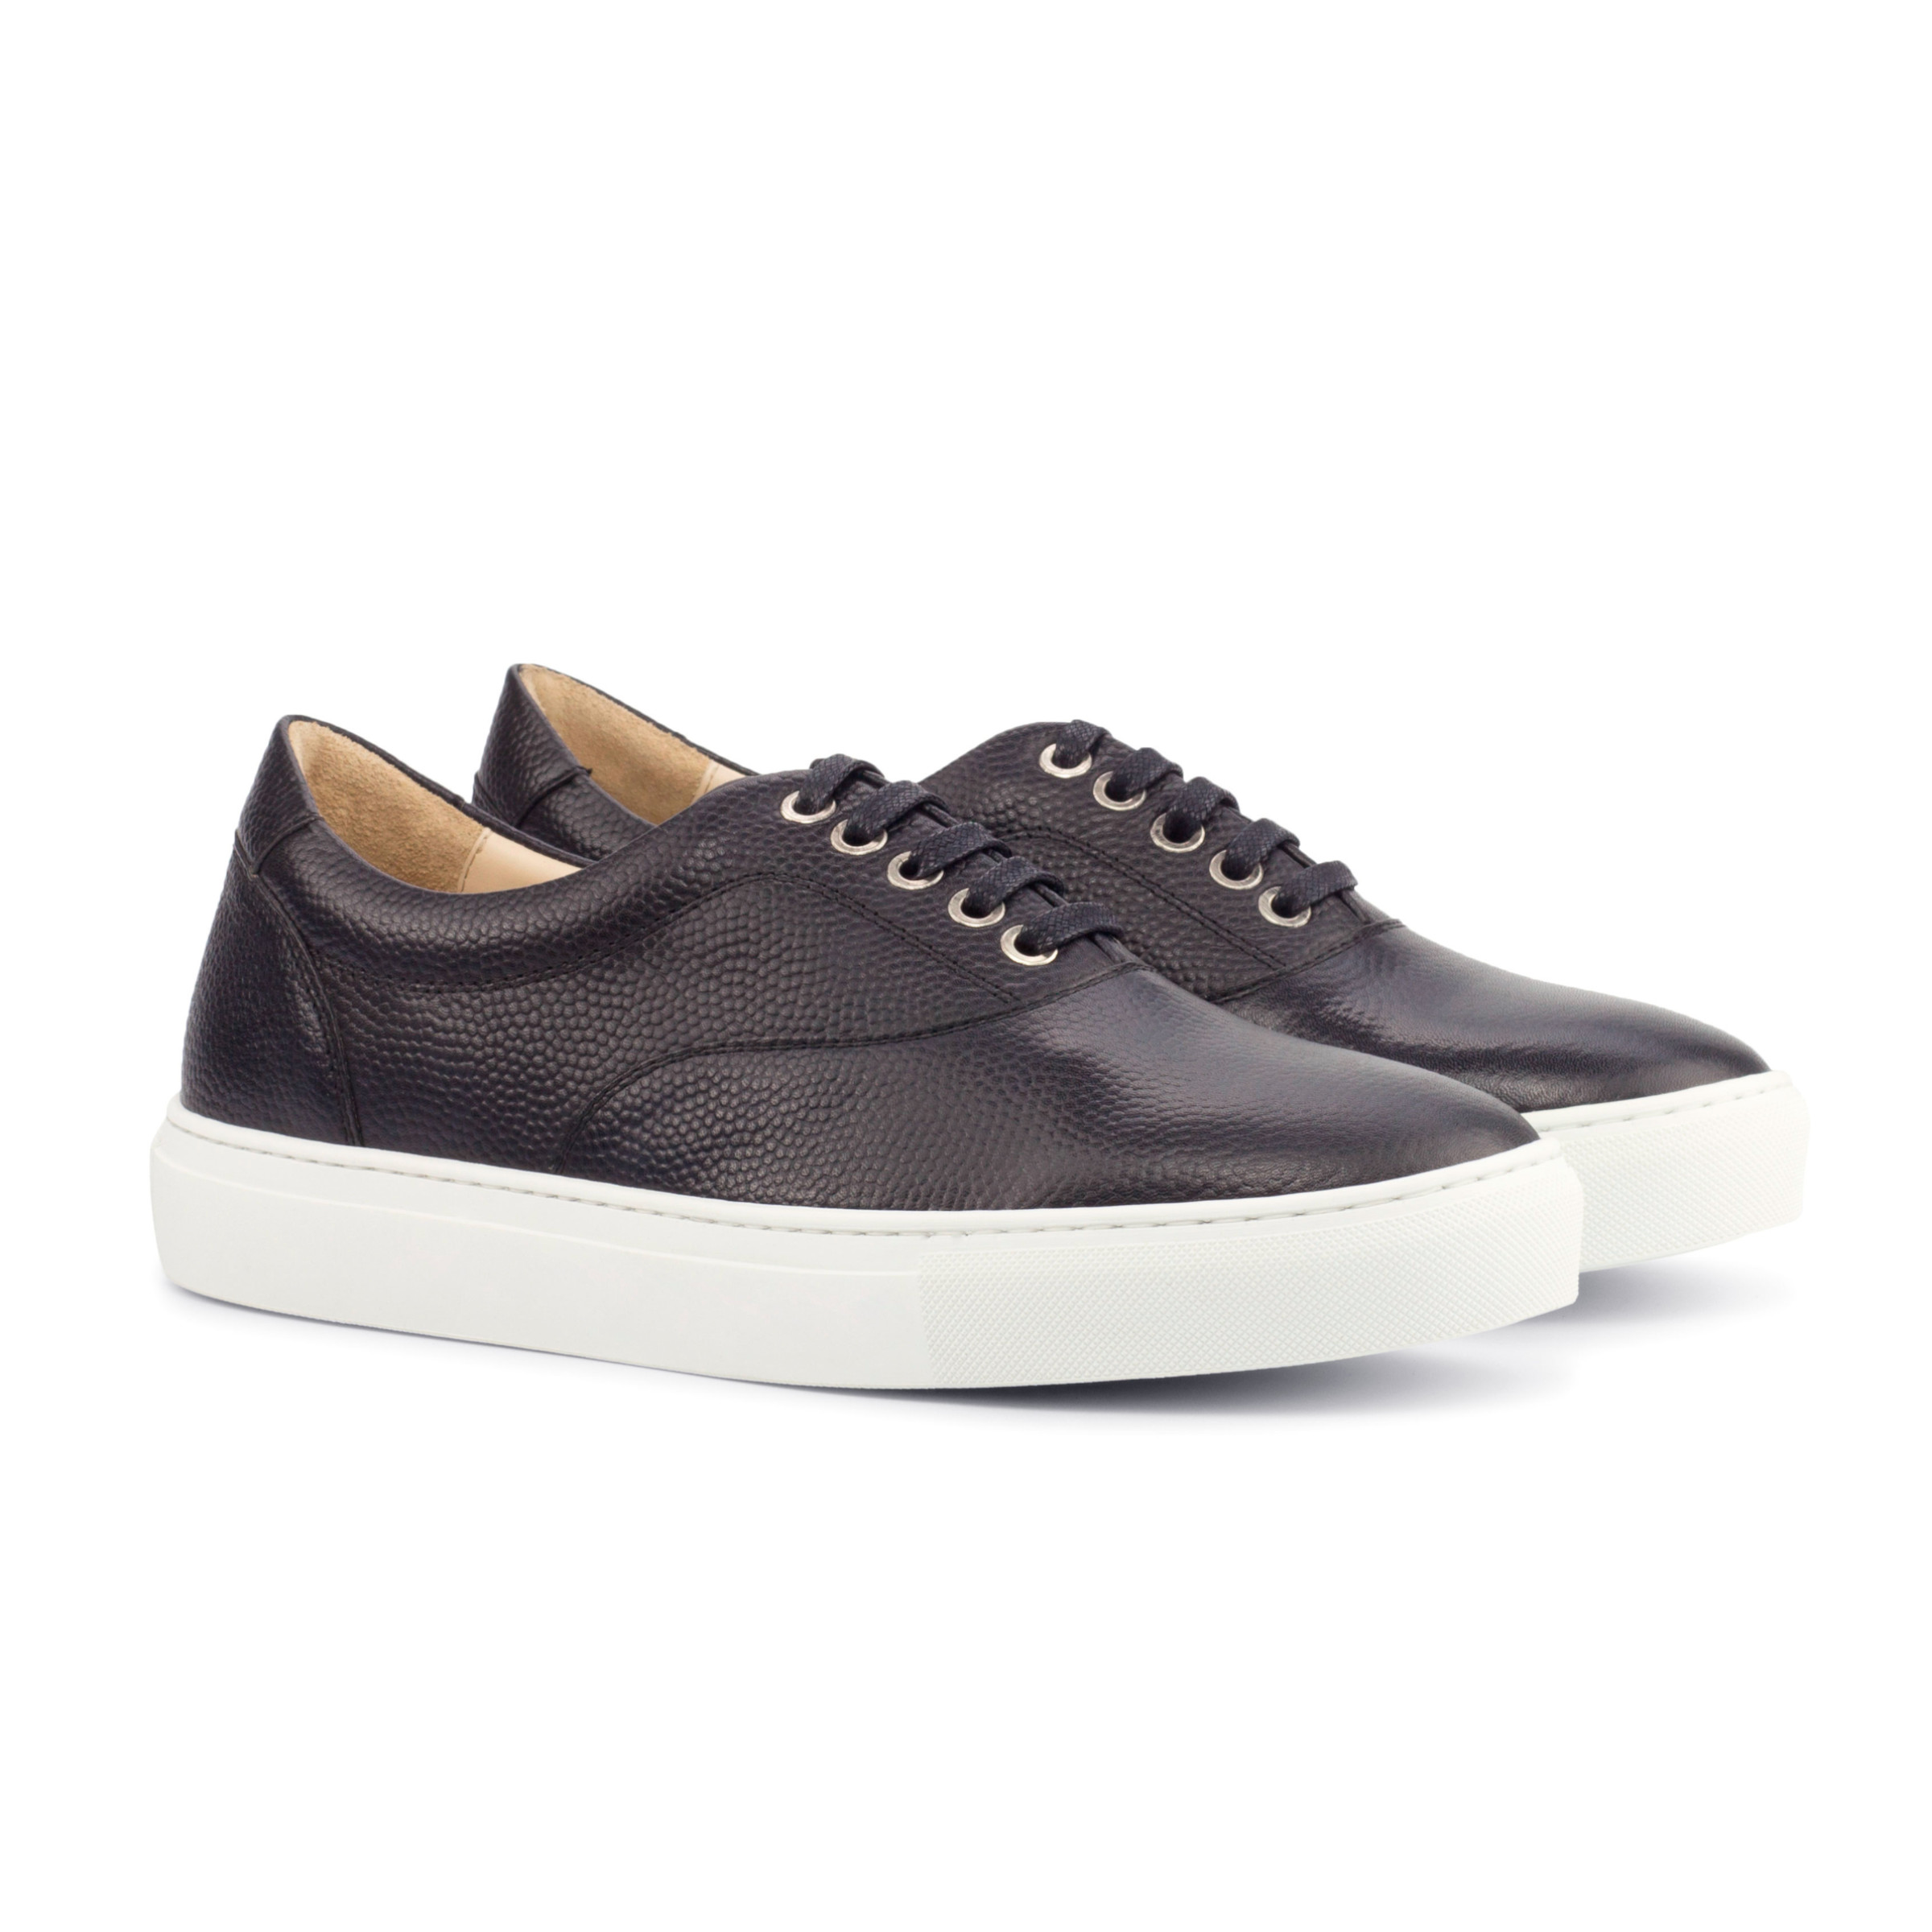 The Mariner: Oil Slick Pebble. Black Pebble Grain lace up sneaker style shoes with white soles on a white background